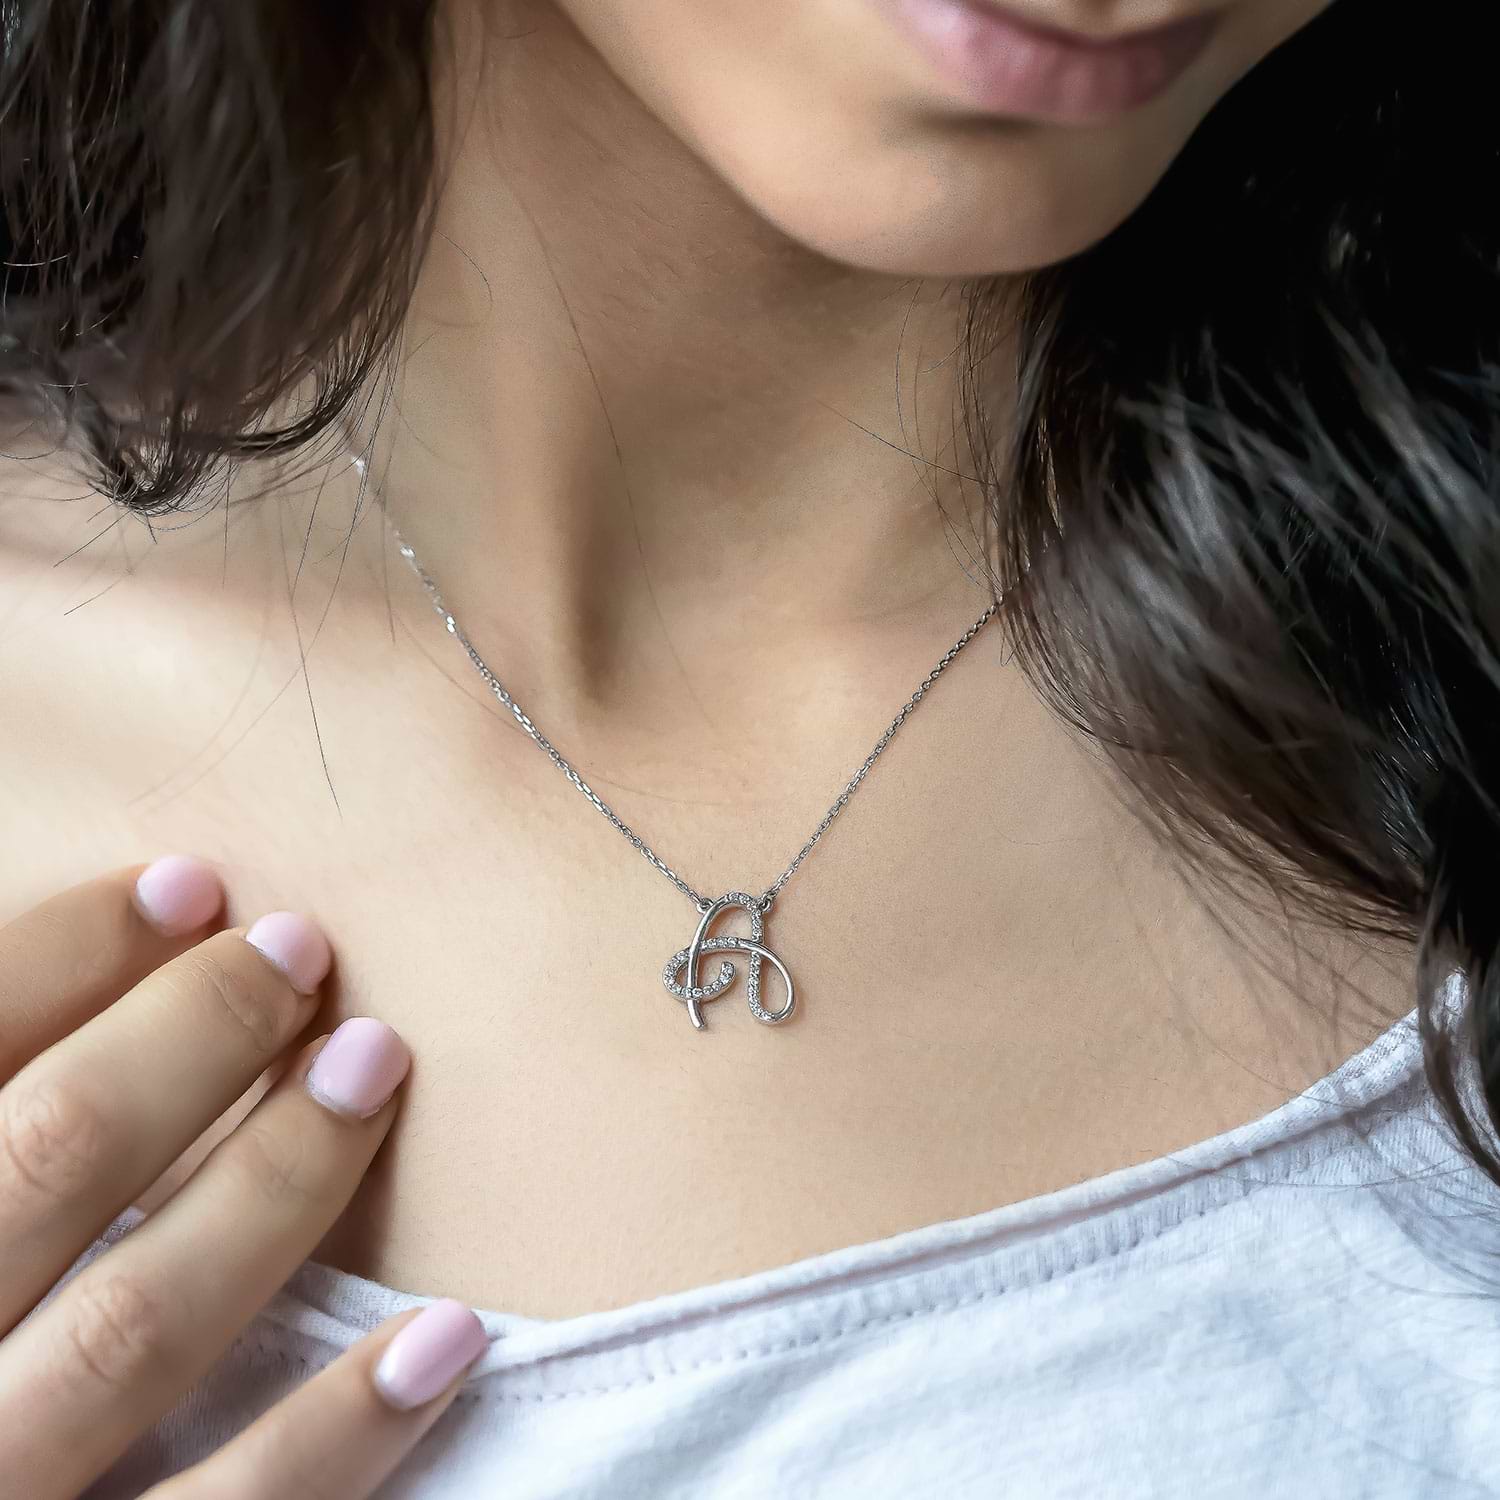 Amazon.com: KOHOTA Cursive Silver Initial Pendant Necklace for Women Miami  Cuban Link Chain Layered Heart Shape Bling Diamond Iced Out Chain Pendant  Necklace Hip Hop Jewelry Gift 2PCS Chains : Clothing, Shoes